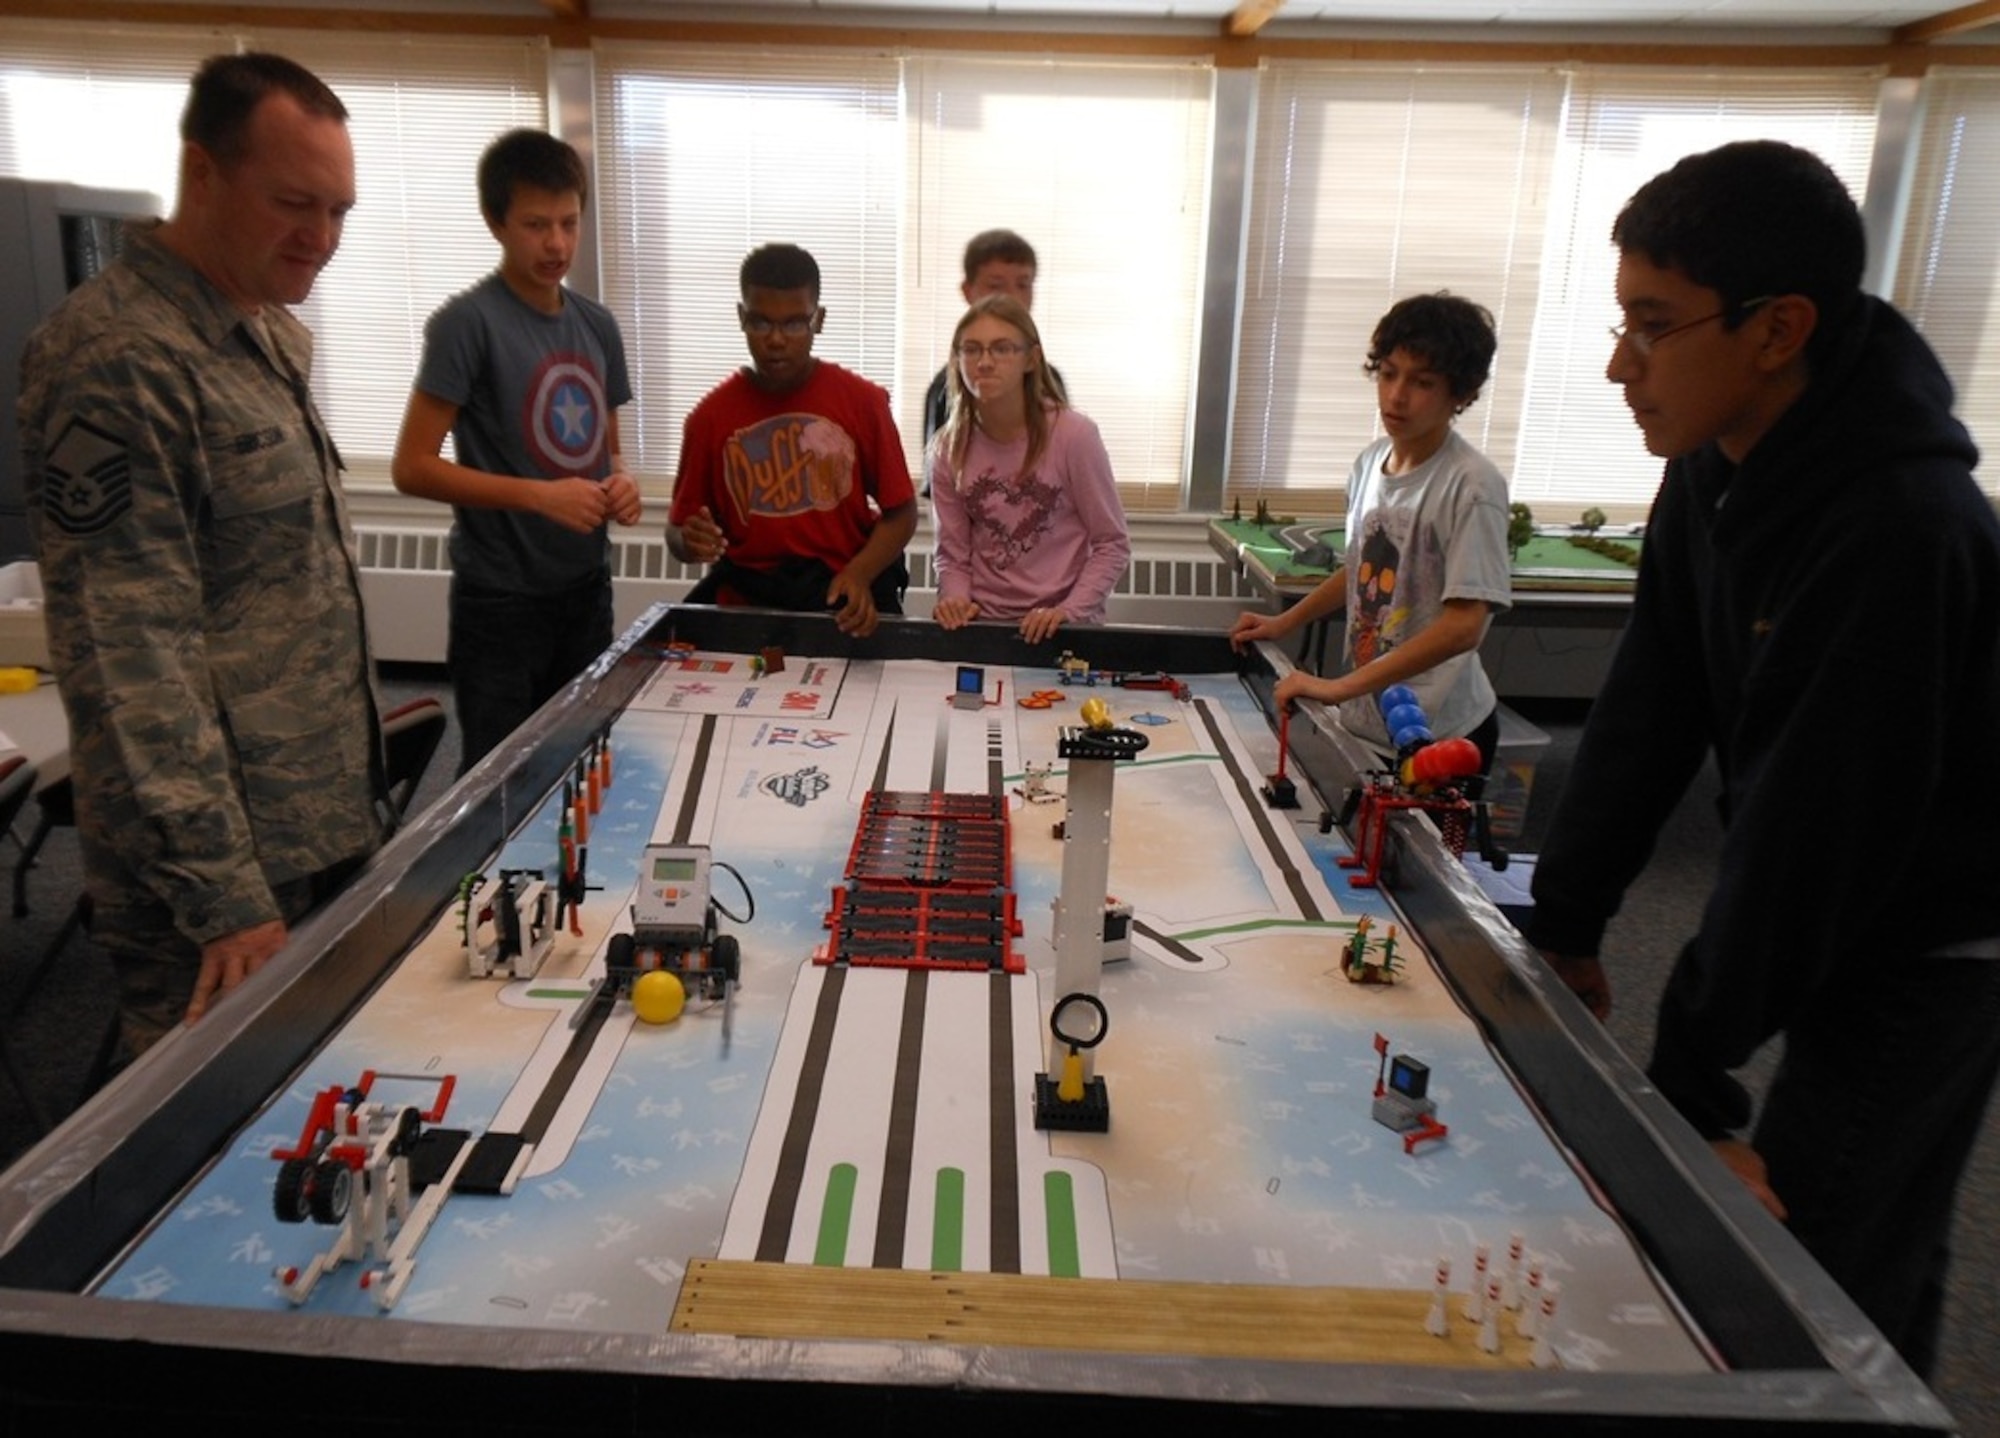 MINOT AIR FORCE BASE, N.D. -- Members of the Ferocious Firebirds and Master Sgt. Clint G. Ericson, 5th Logistics Readiness Squadron fuels superintendent and team coach, work on their entry for the FIRST LEGO League team competition held recently in Grand Forks, N.D. The team of students from Memorial Middle School won first place for Teamwork. Their winning Lego robotics design was an idea to make driving safer for the elderly. (Courtesy photo)